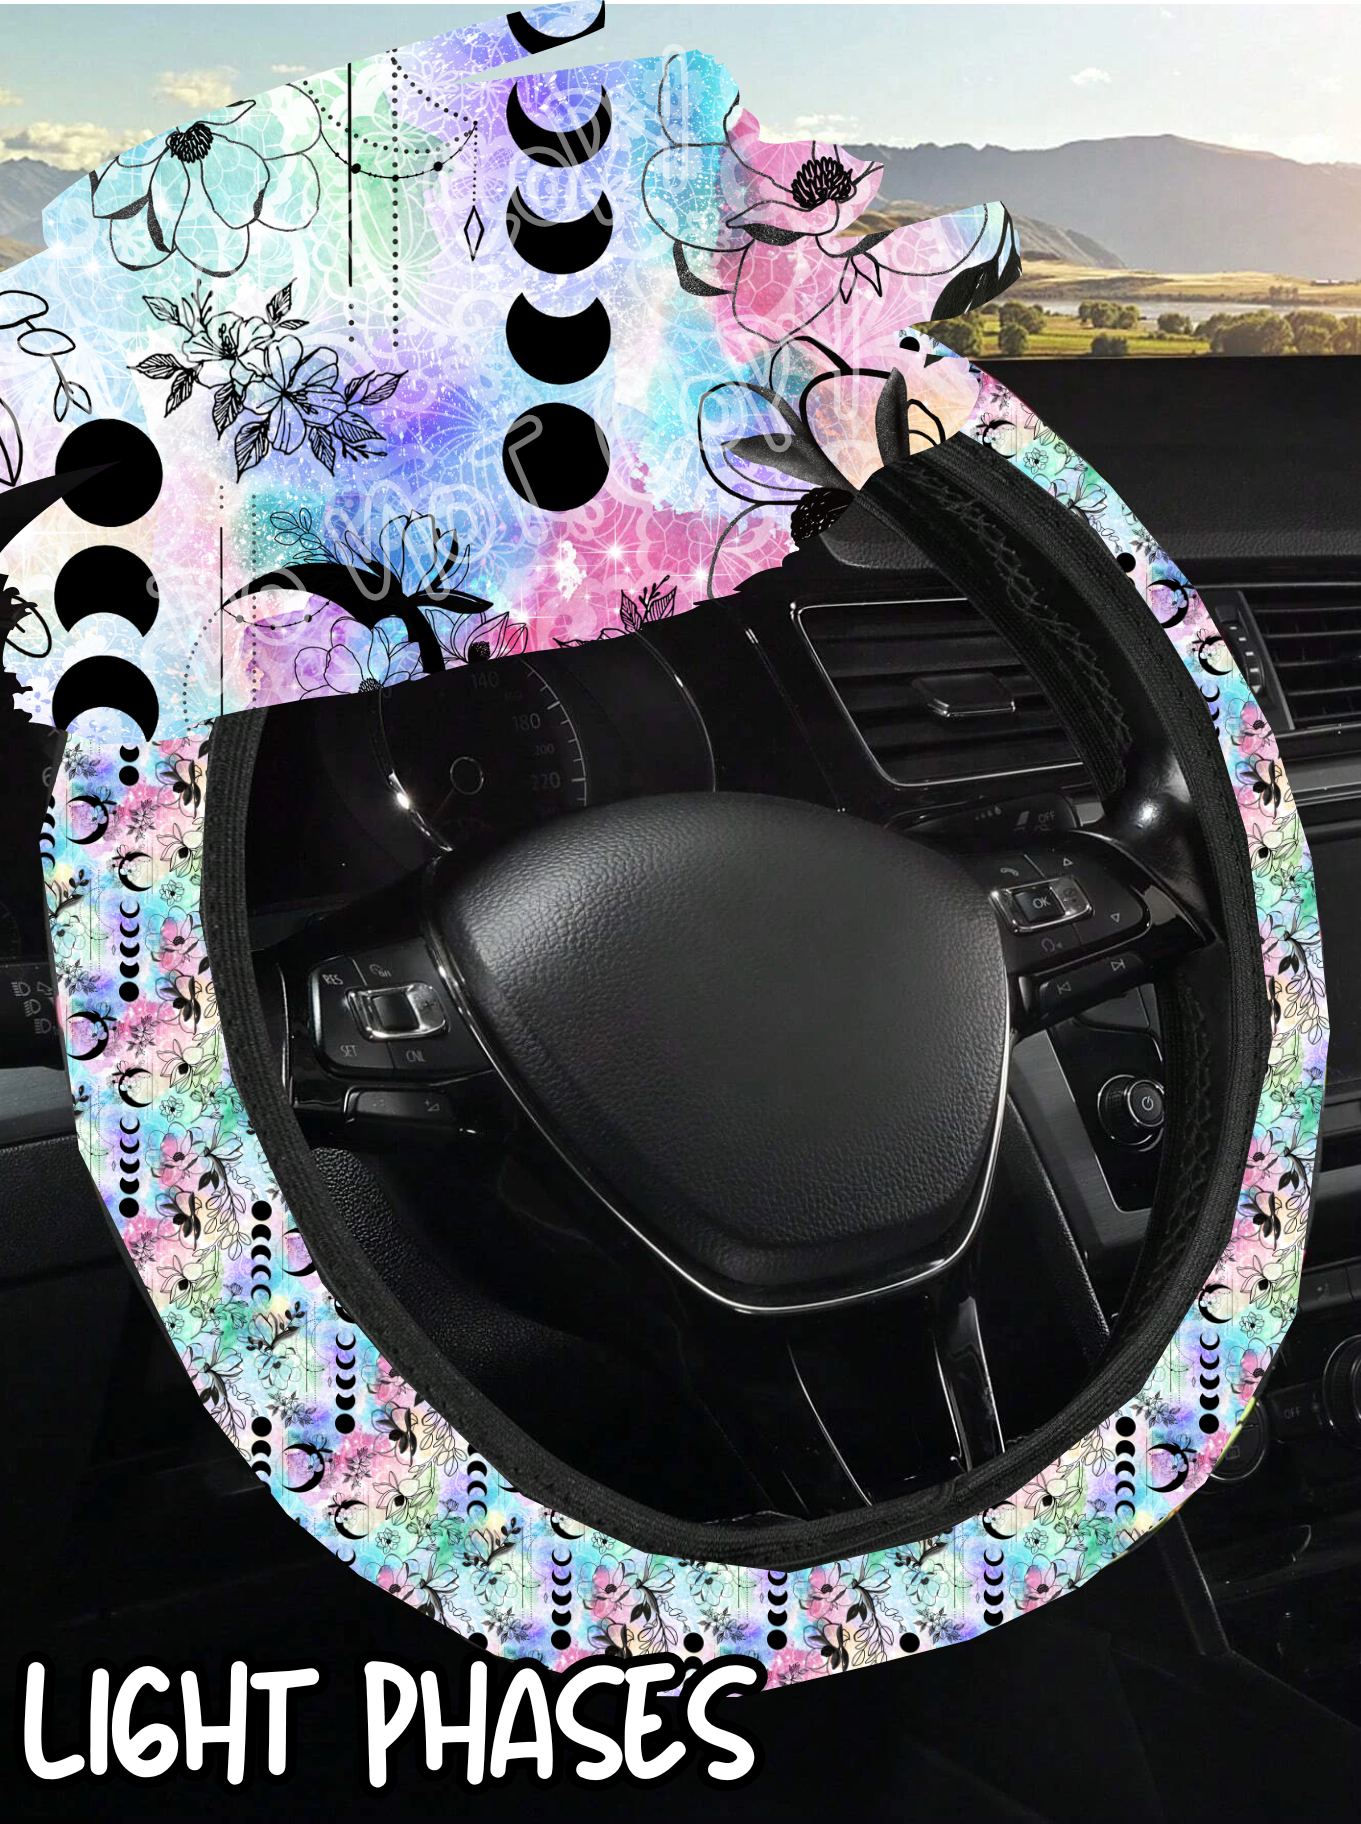 Light Phases - Steering Wheel Cover Preorder Round 3 Closing 10/25 ETA Early Dec